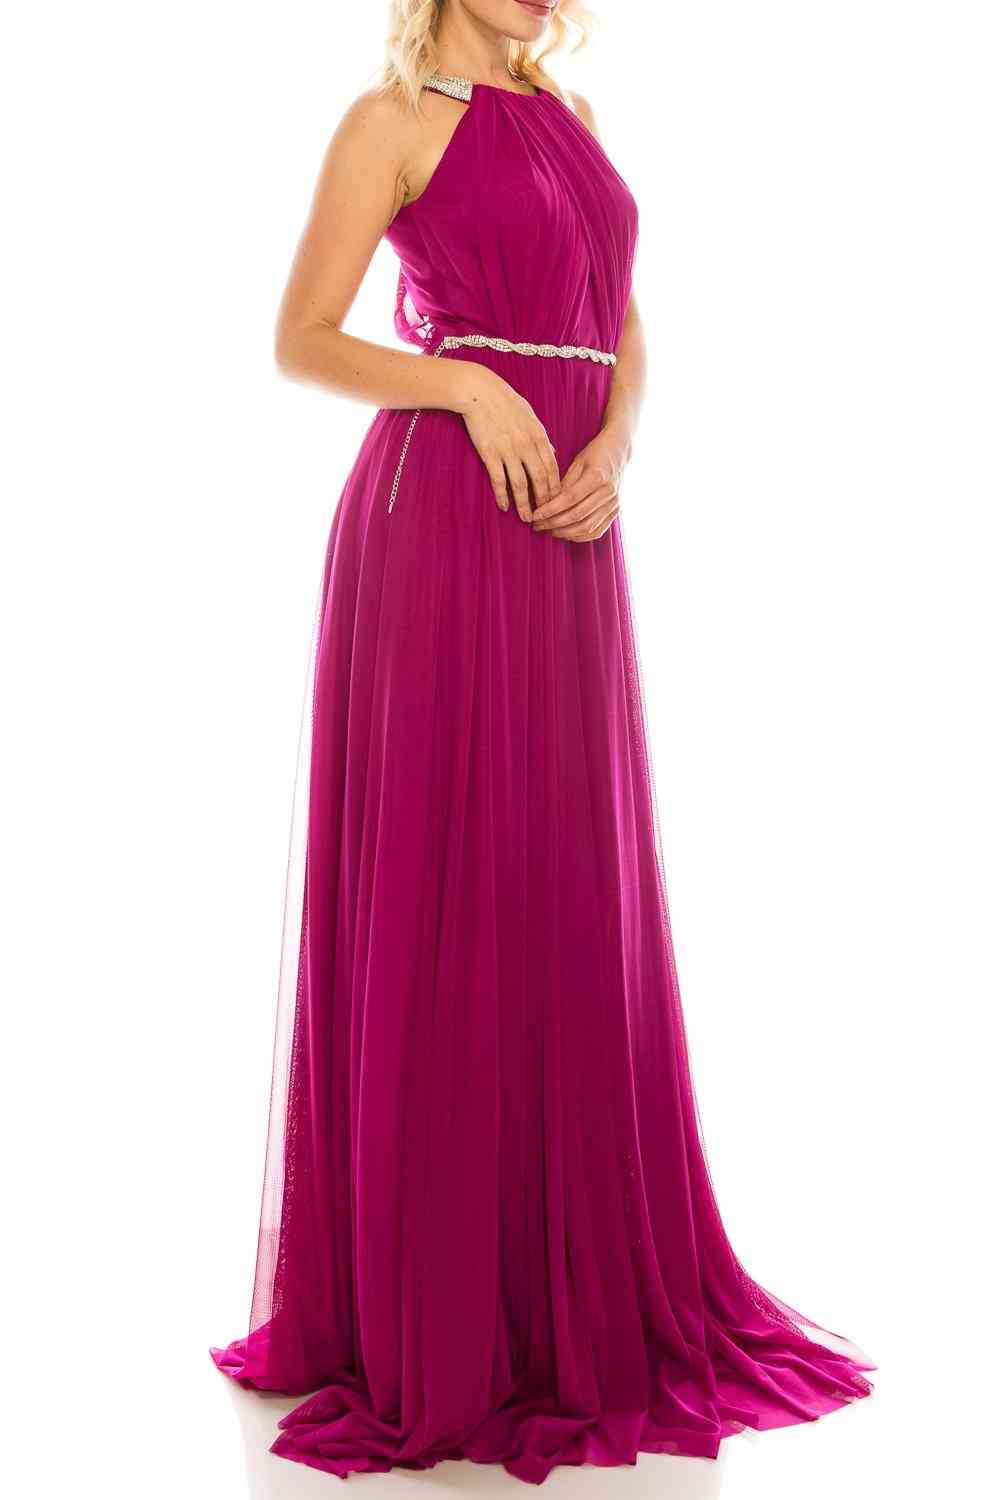 A-line Silhouette Sleeveless, Halter Evening Gown